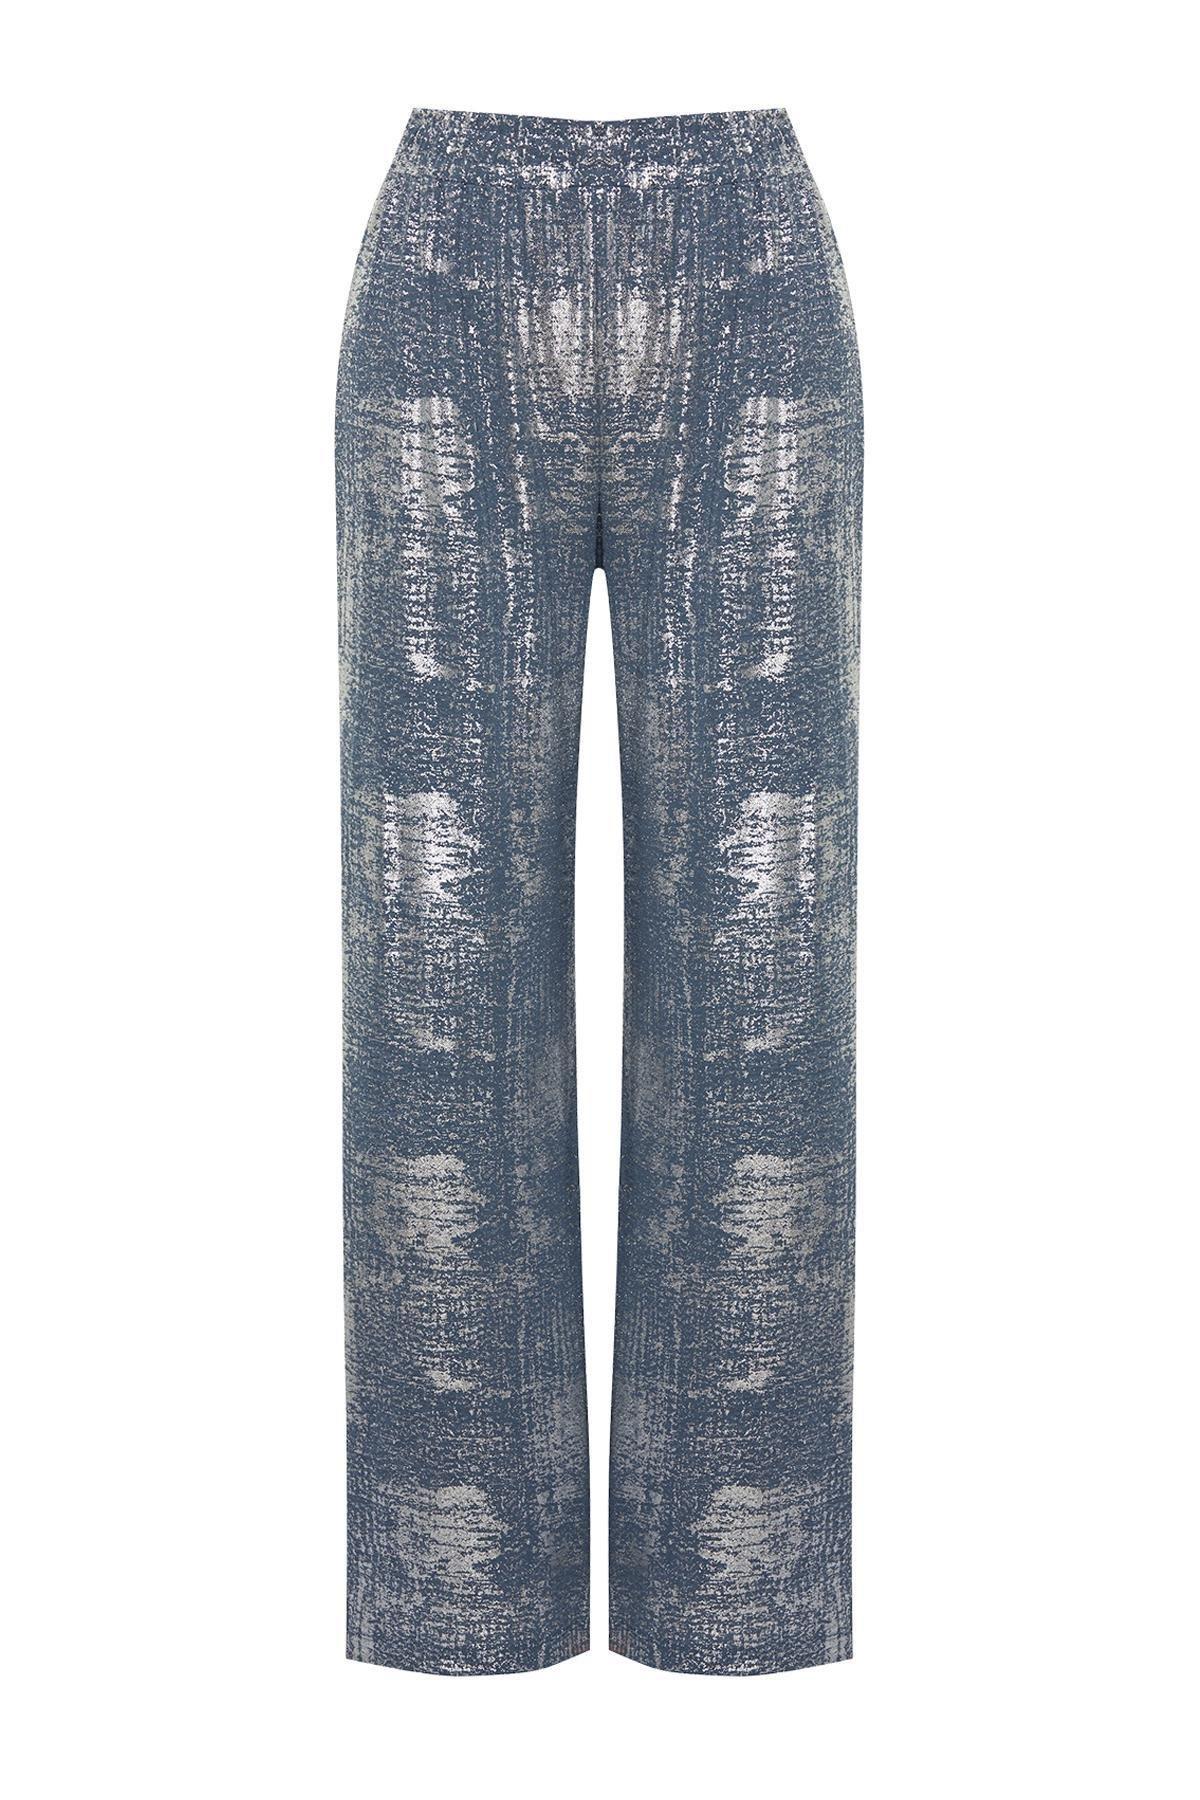 Trendyol - Grey Foil Printed High Waist Wide Leg Flexible Knitted Trousers